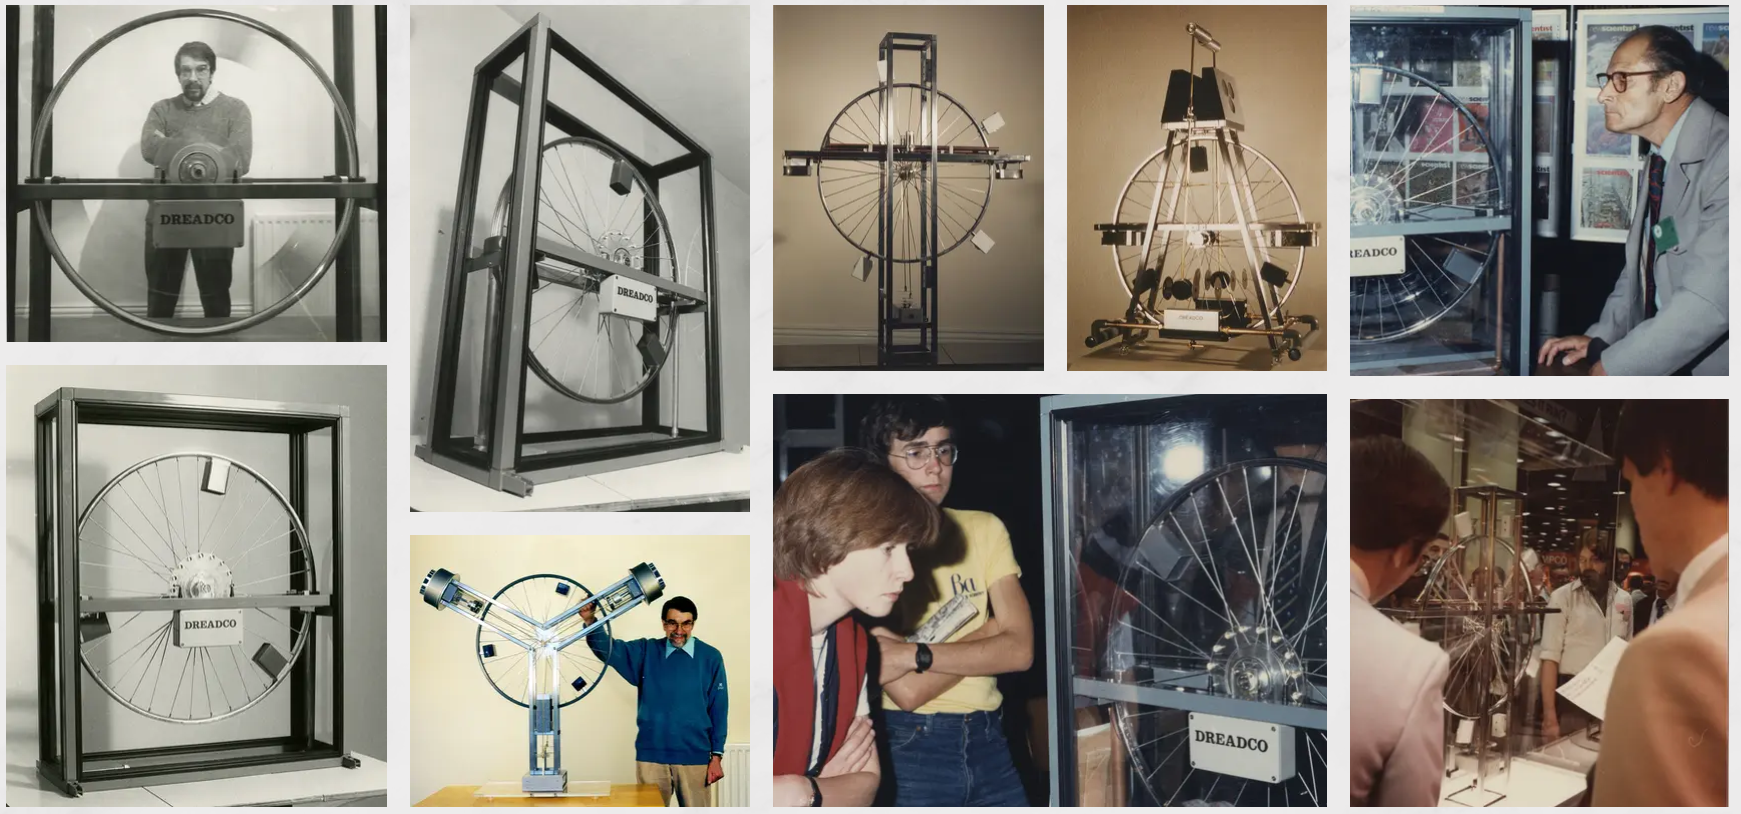 Selected images documenting different Perpetual Motion Machine sculptures and previous public displays